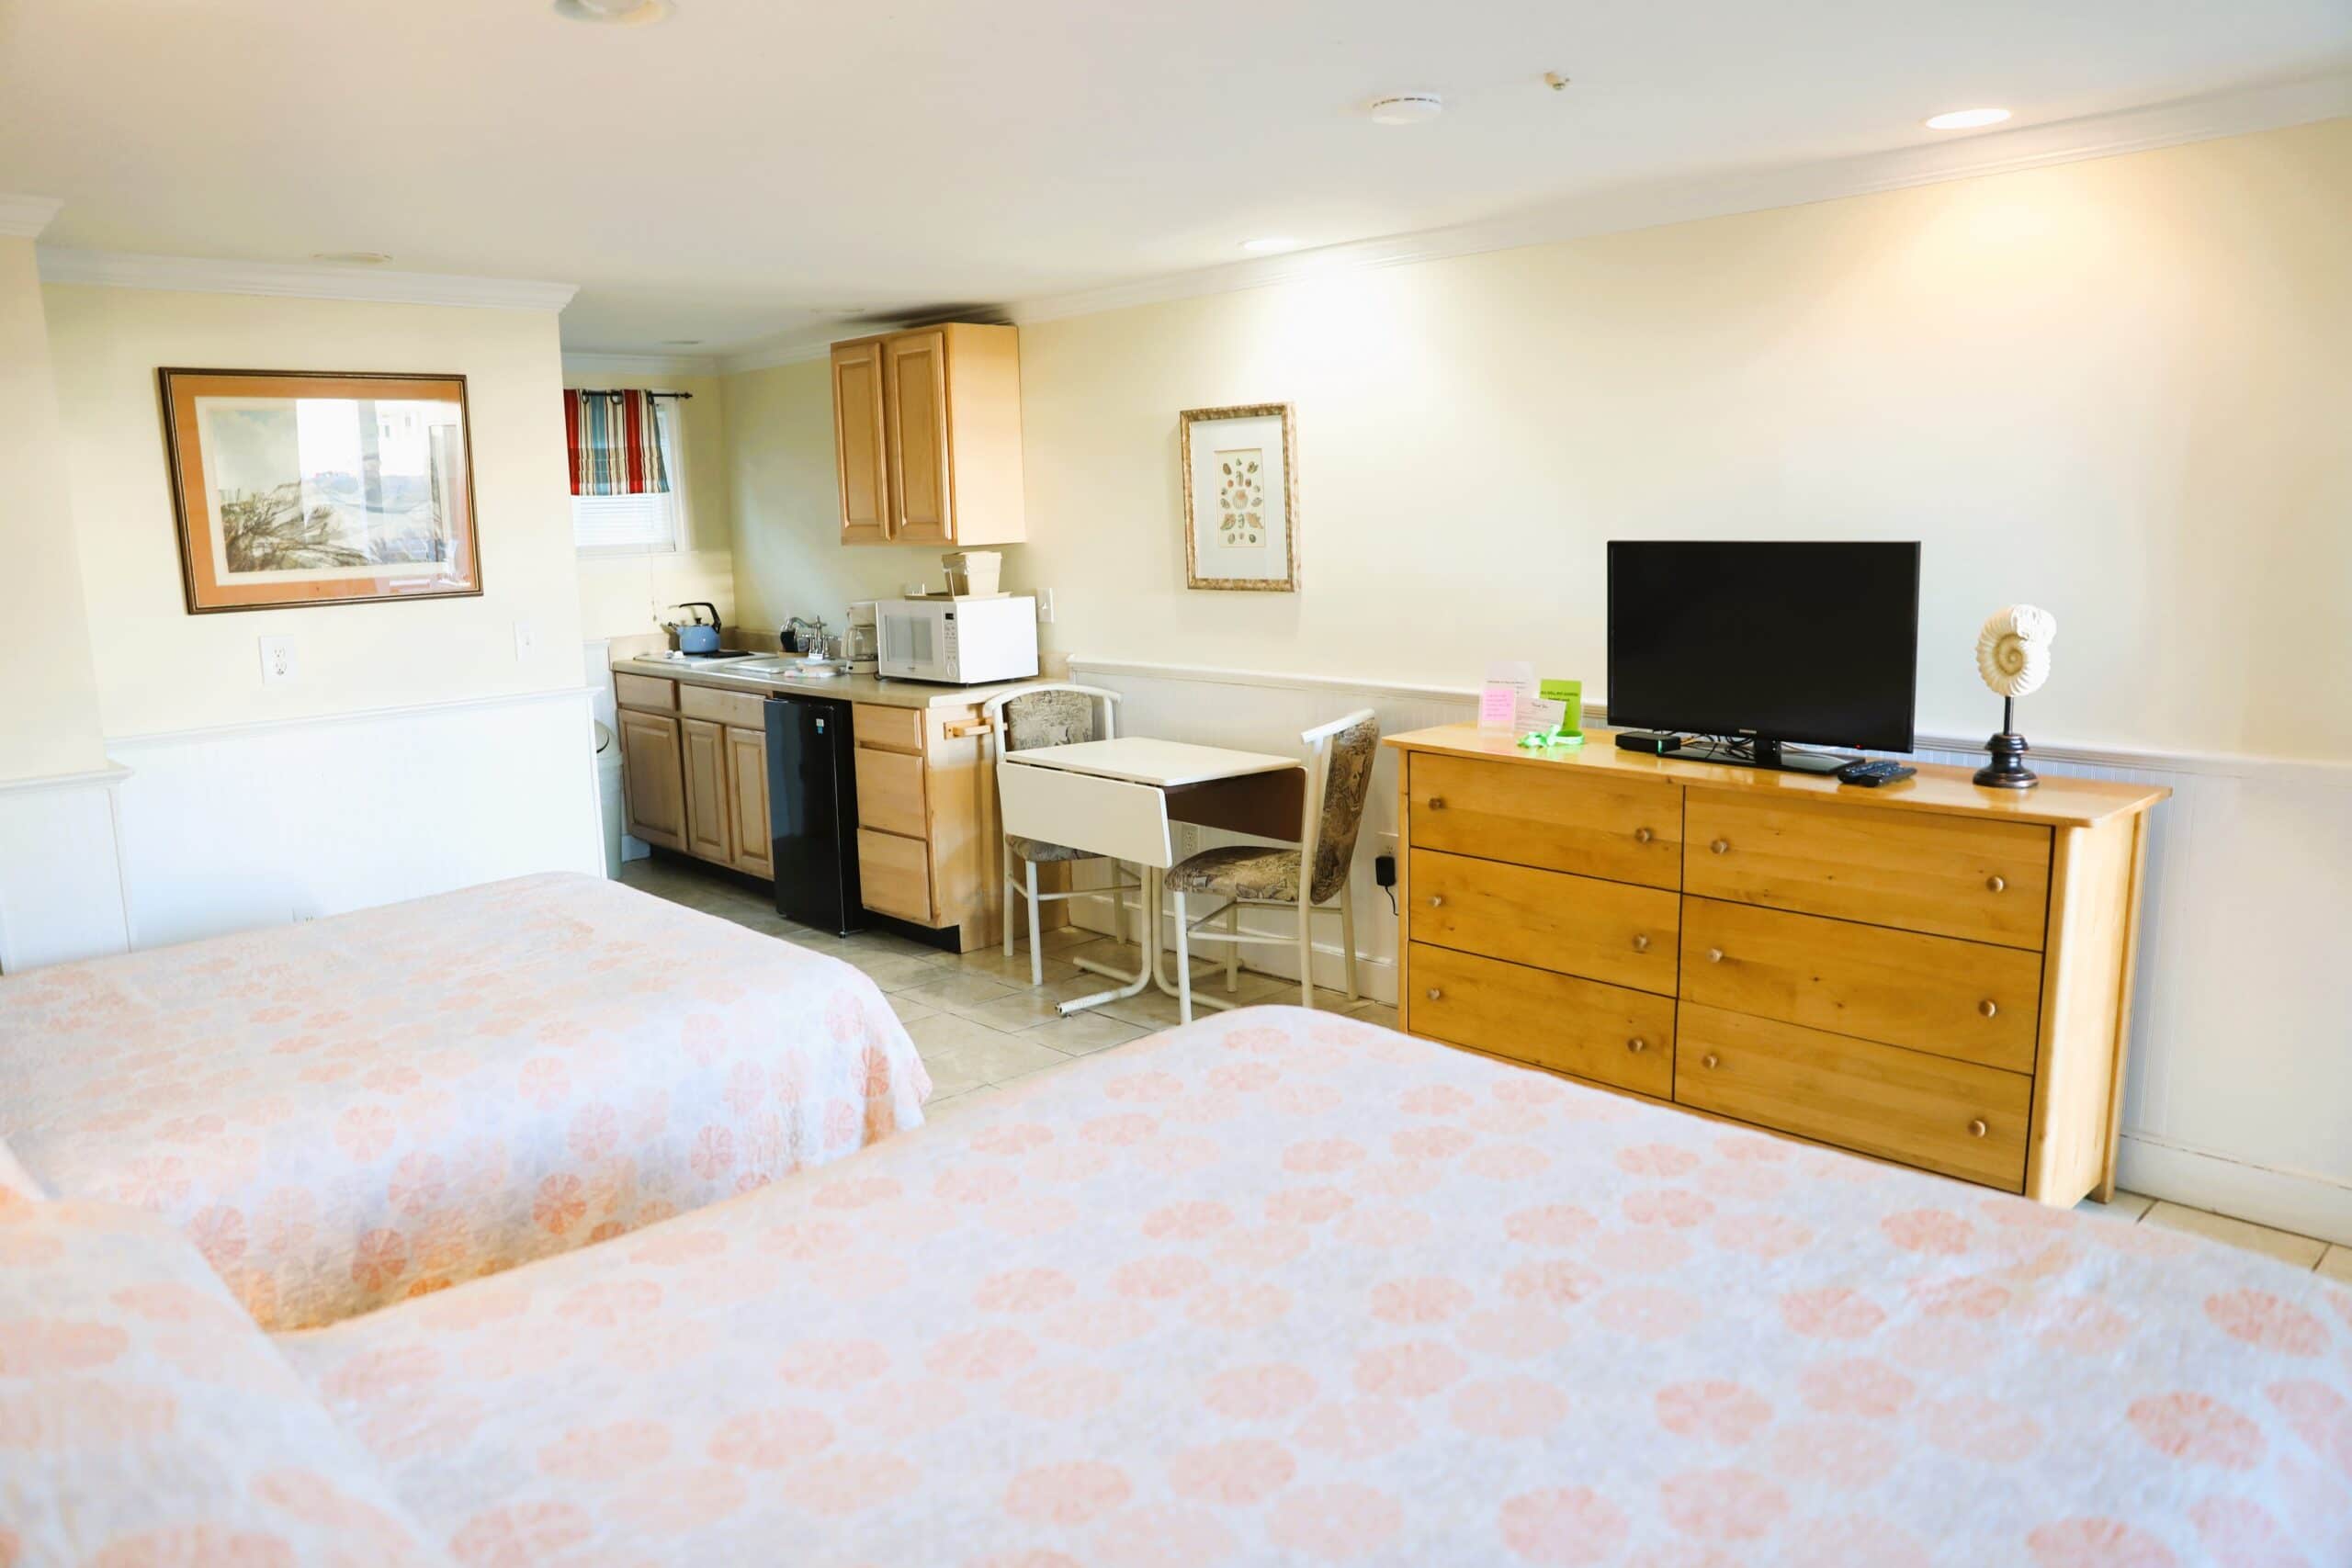 Spacious Room with Kitchenette, Room #2